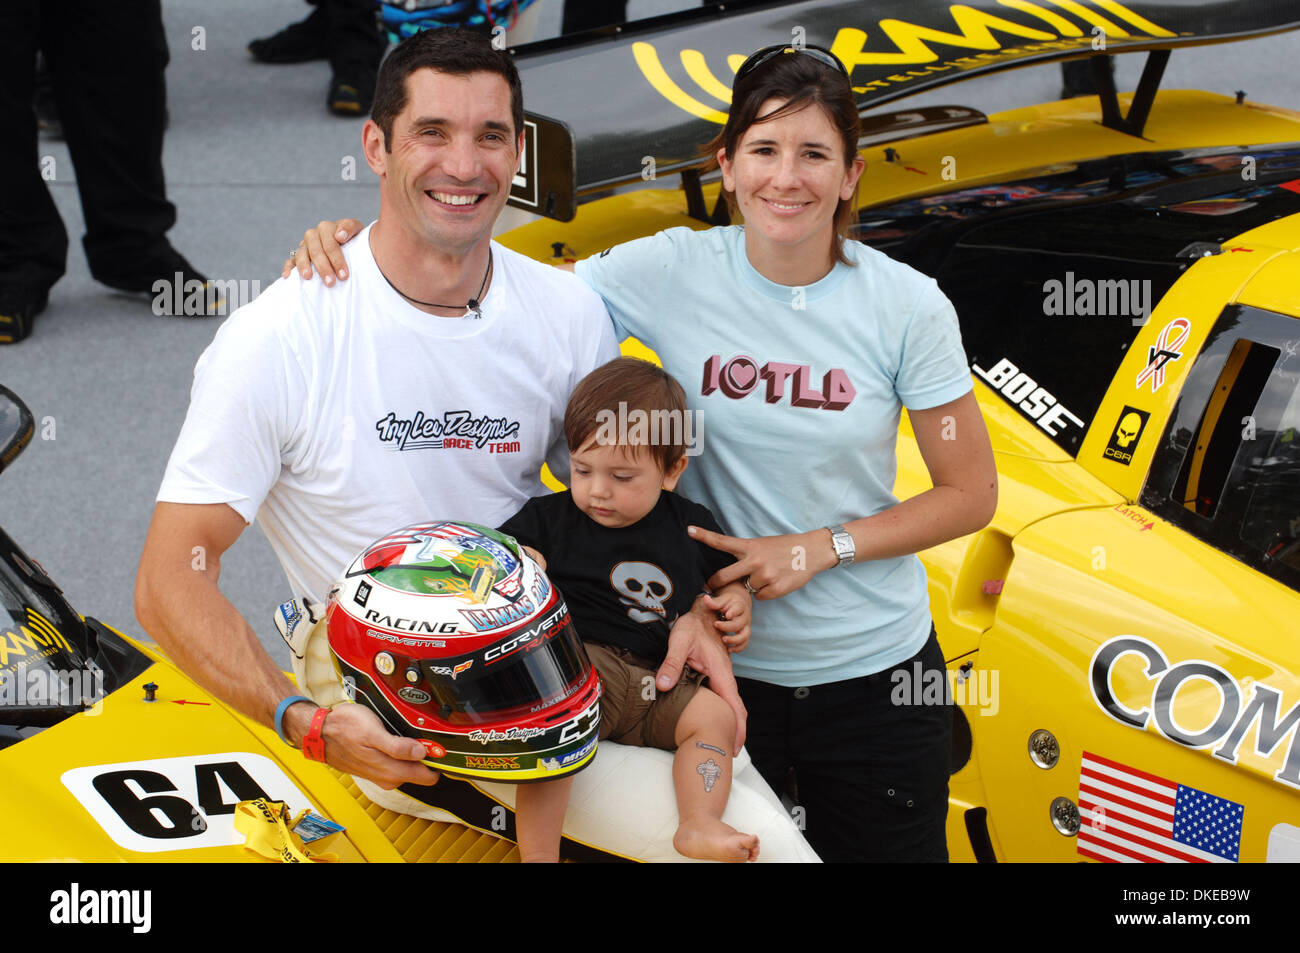 Jun 17, 2007 - Le Mans, France - Corvette driver MAX PAPIS, of Italy, with his wife and son during the 24 Hours of Le Mans scrutineering, 11 June, 2007.  (Credit Image: © Rainier Ehrhardt/ZUMAPRESS.com) Stock Photo